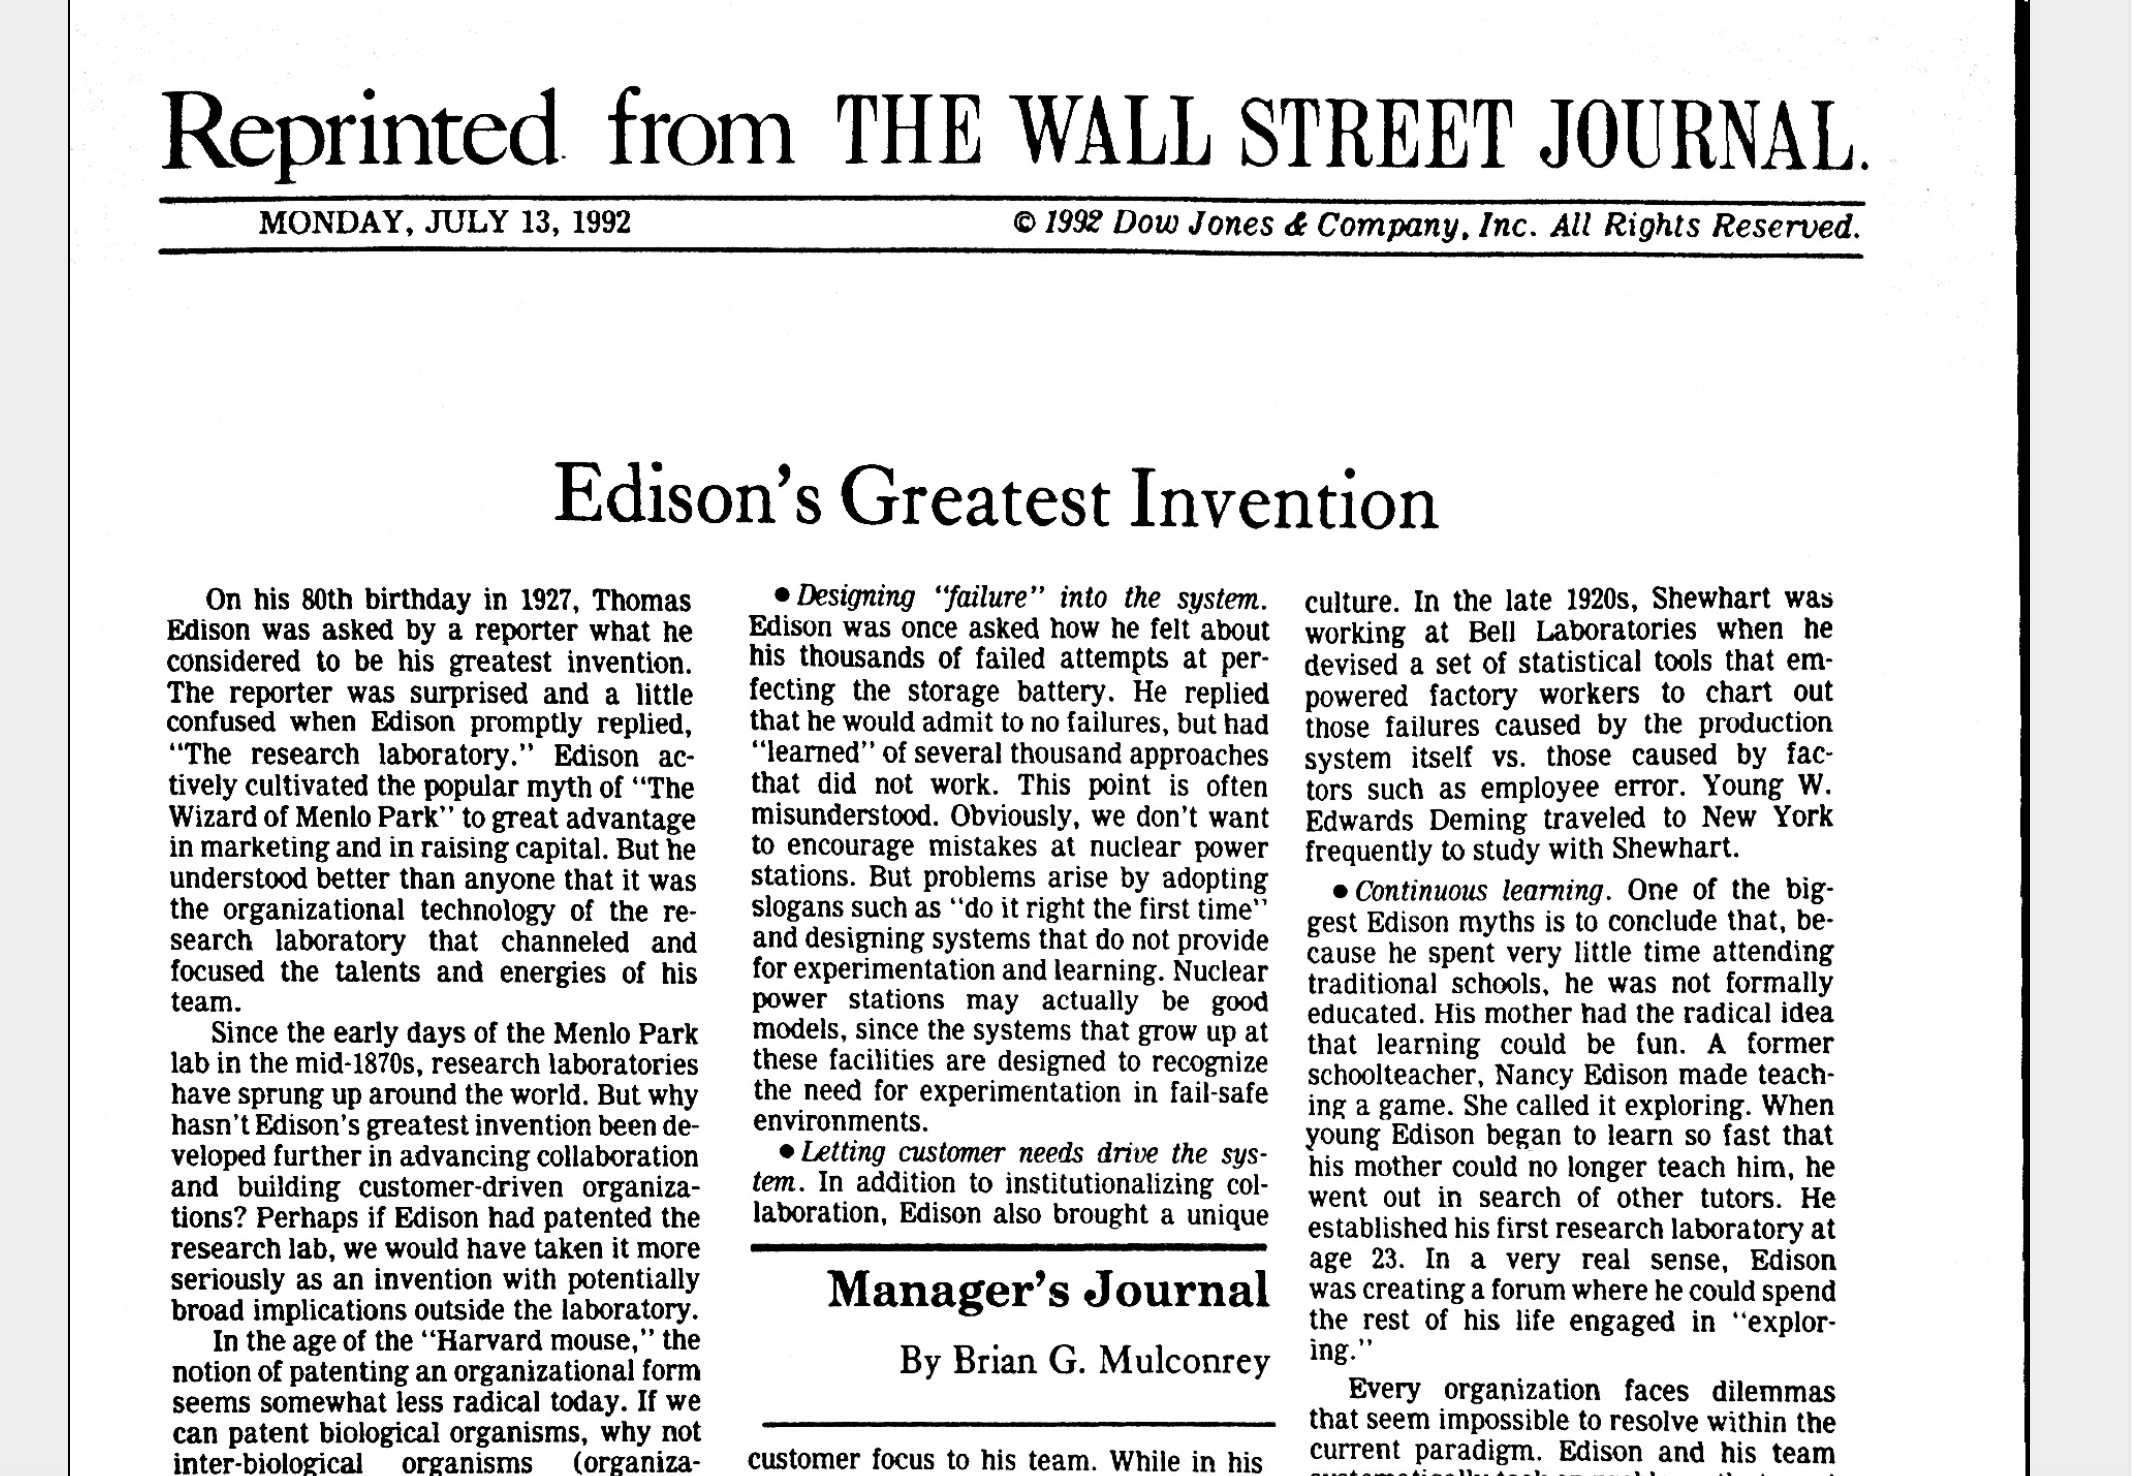 Edison’s Greatest Invention (WSJ Editorial Page)